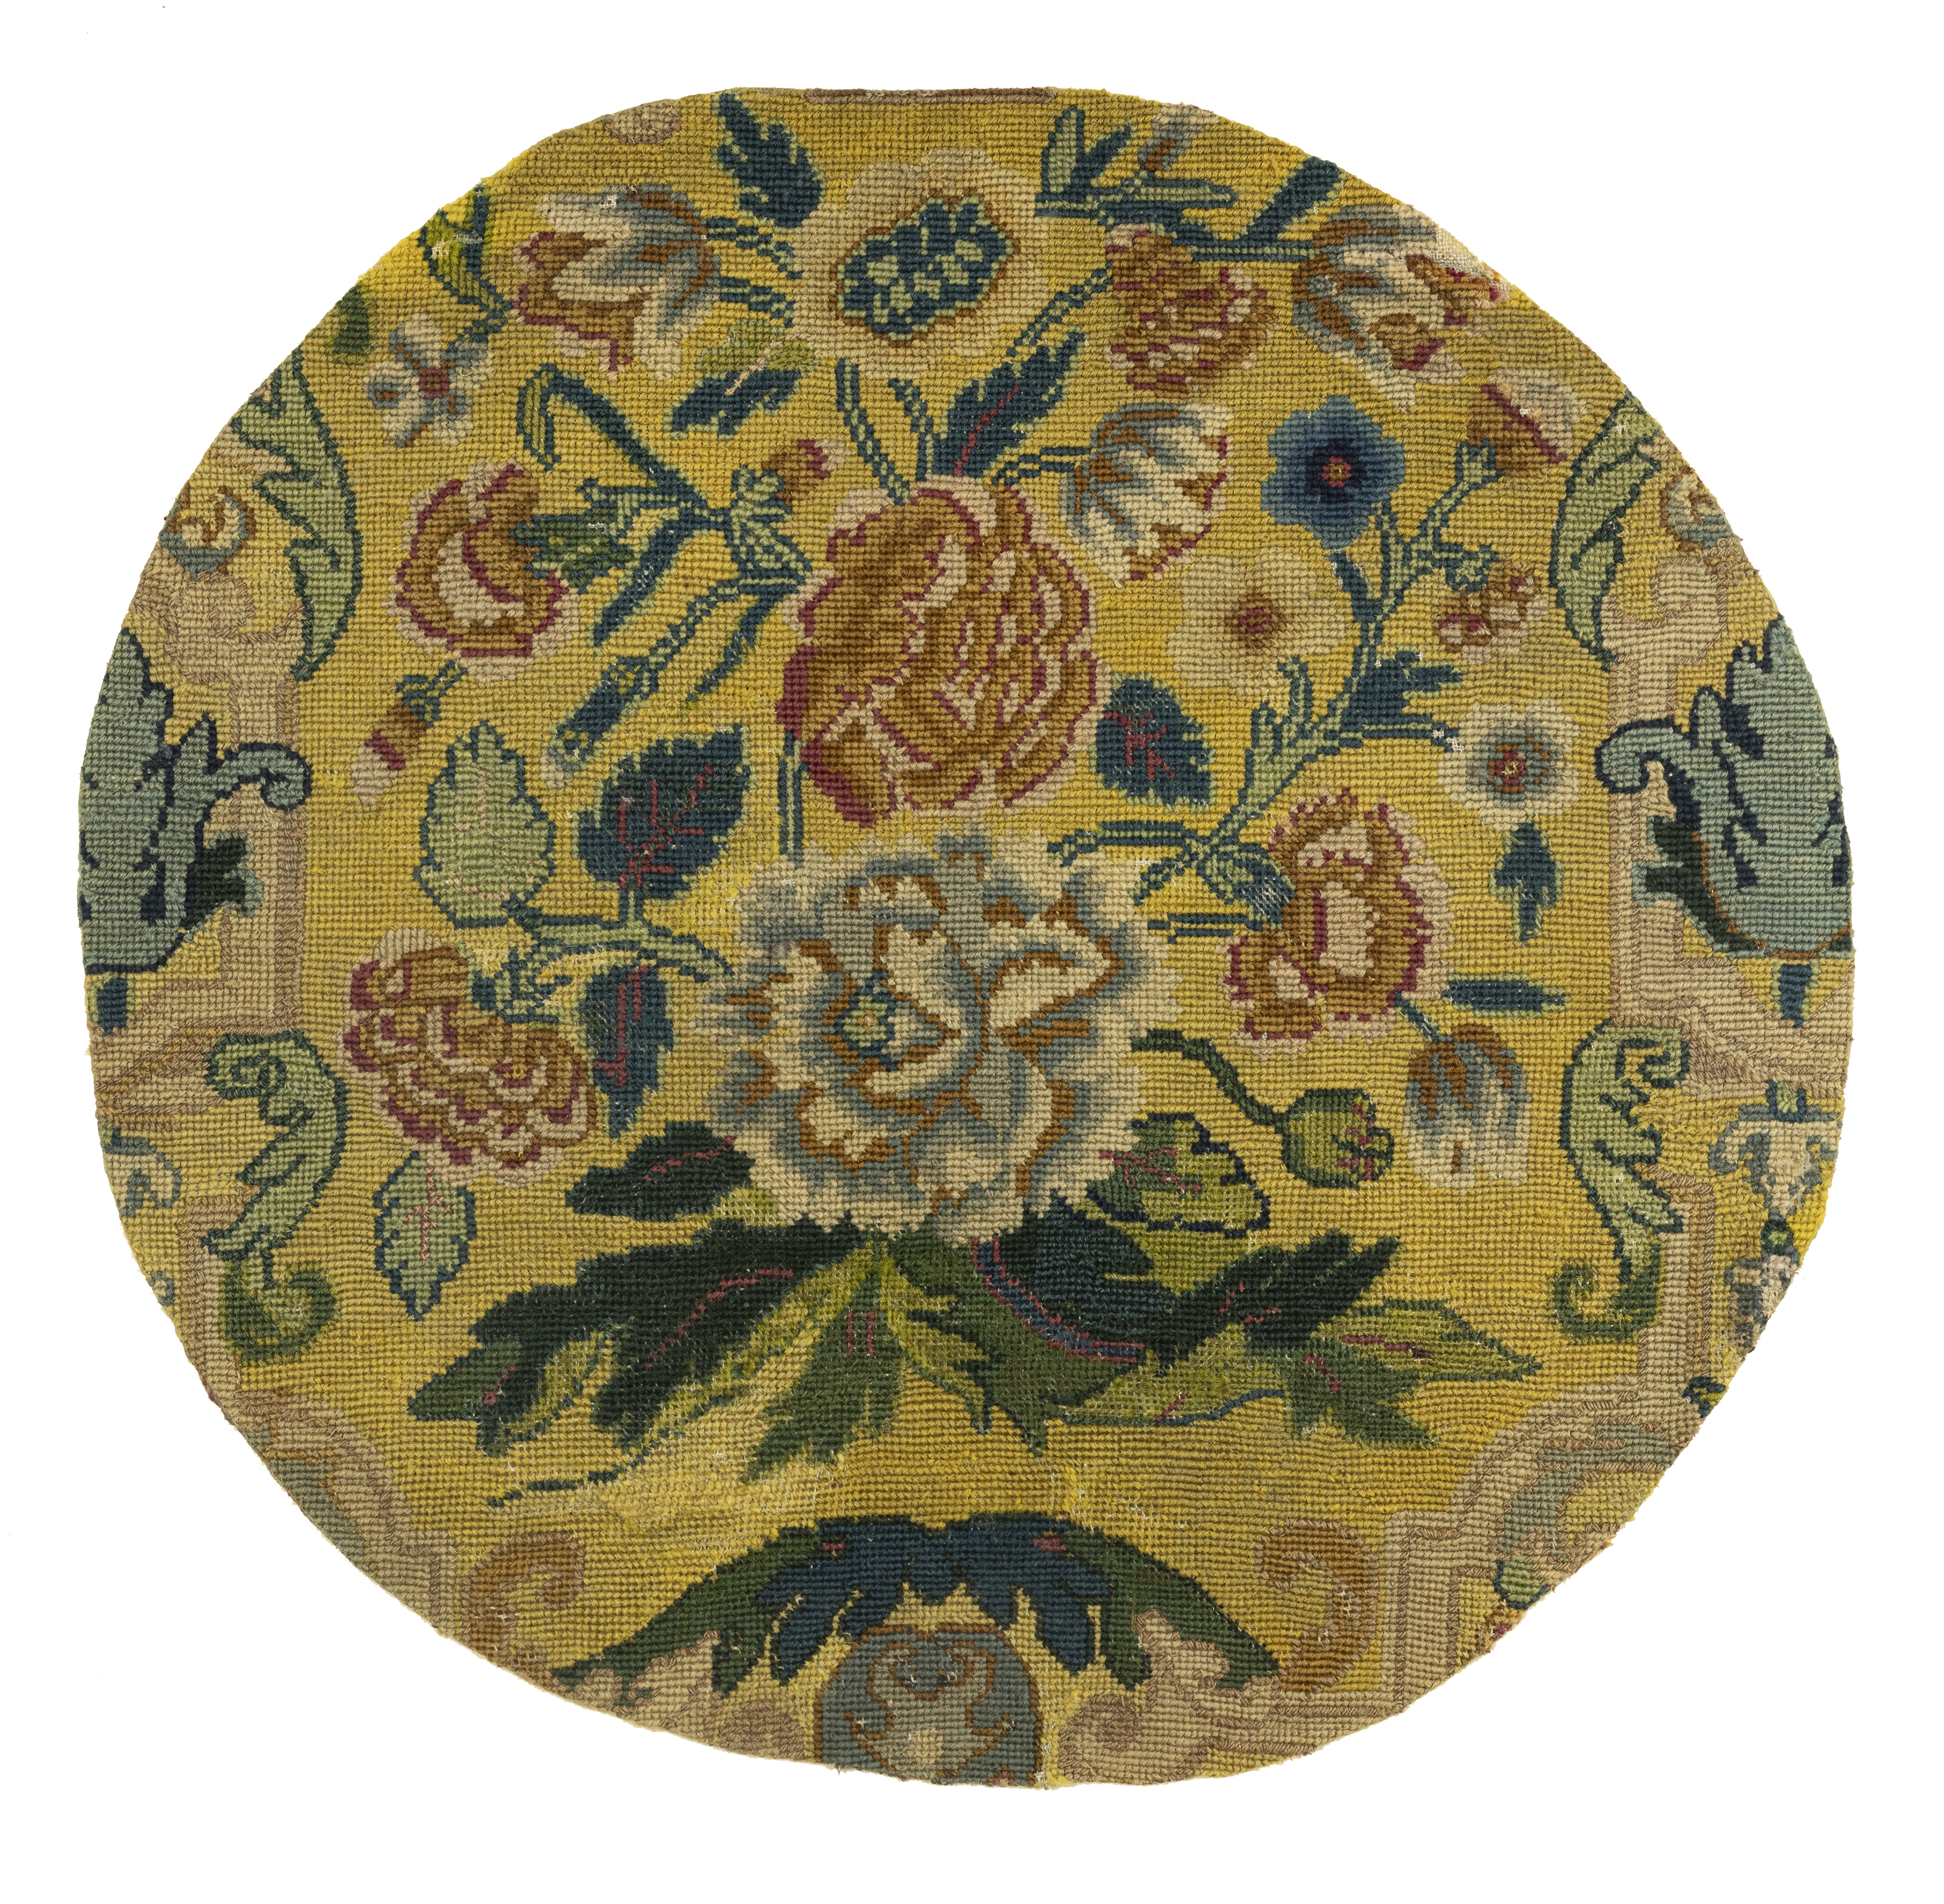 Two French oval needlework fragments, 18th century, Worked in wool, both with blossoming flowers ... - Image 4 of 5